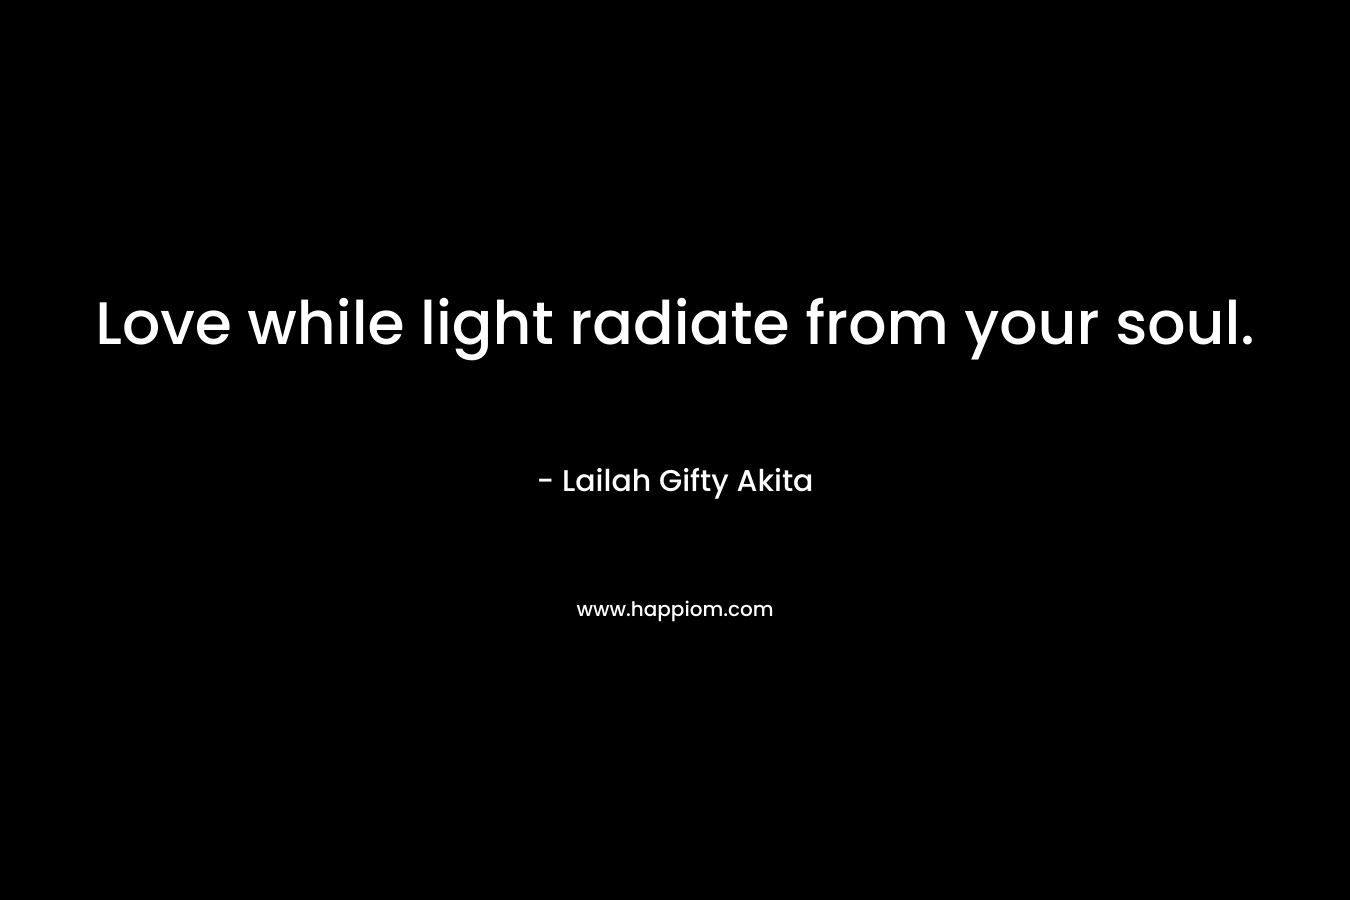 Love while light radiate from your soul.